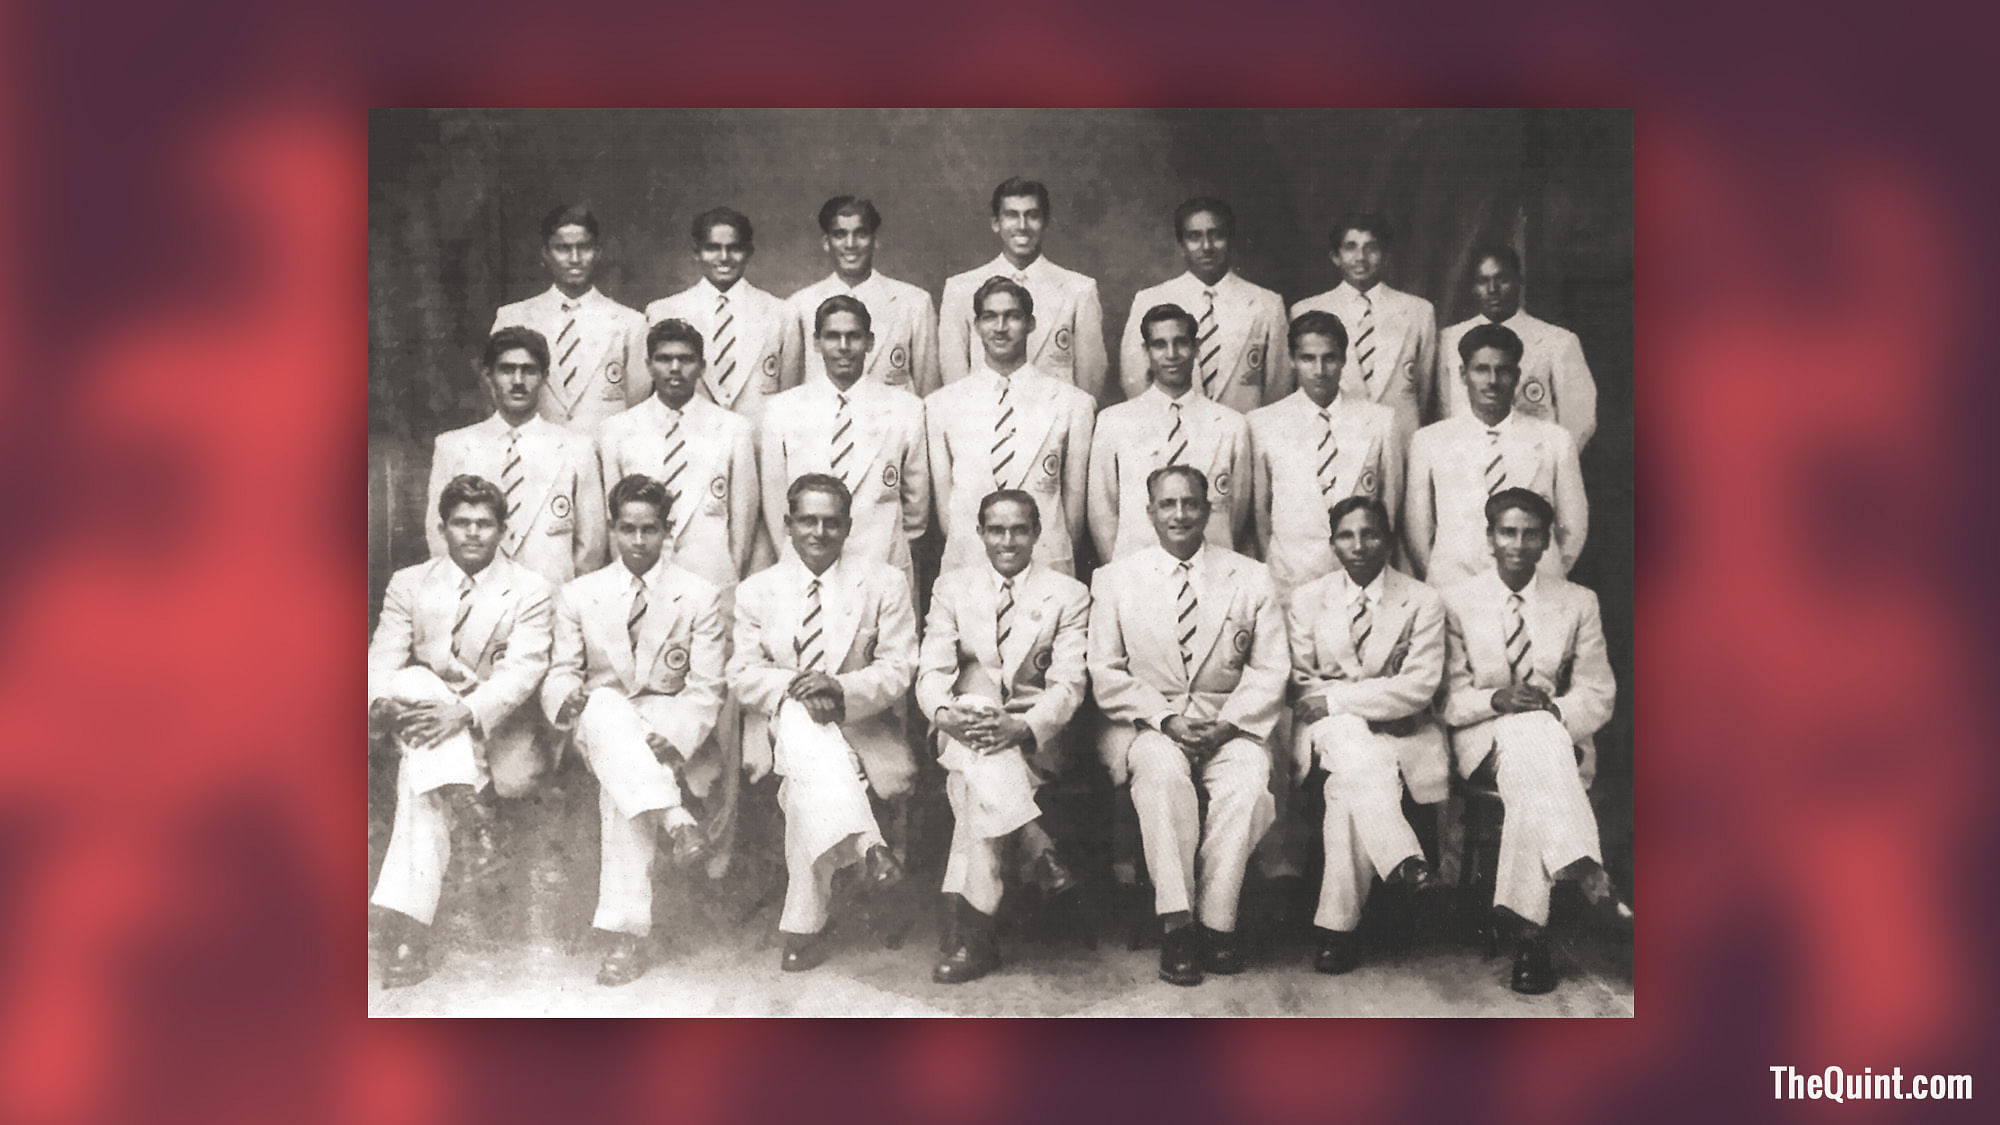 The Indian team that competed at the 1956 Melbourne Olympics.